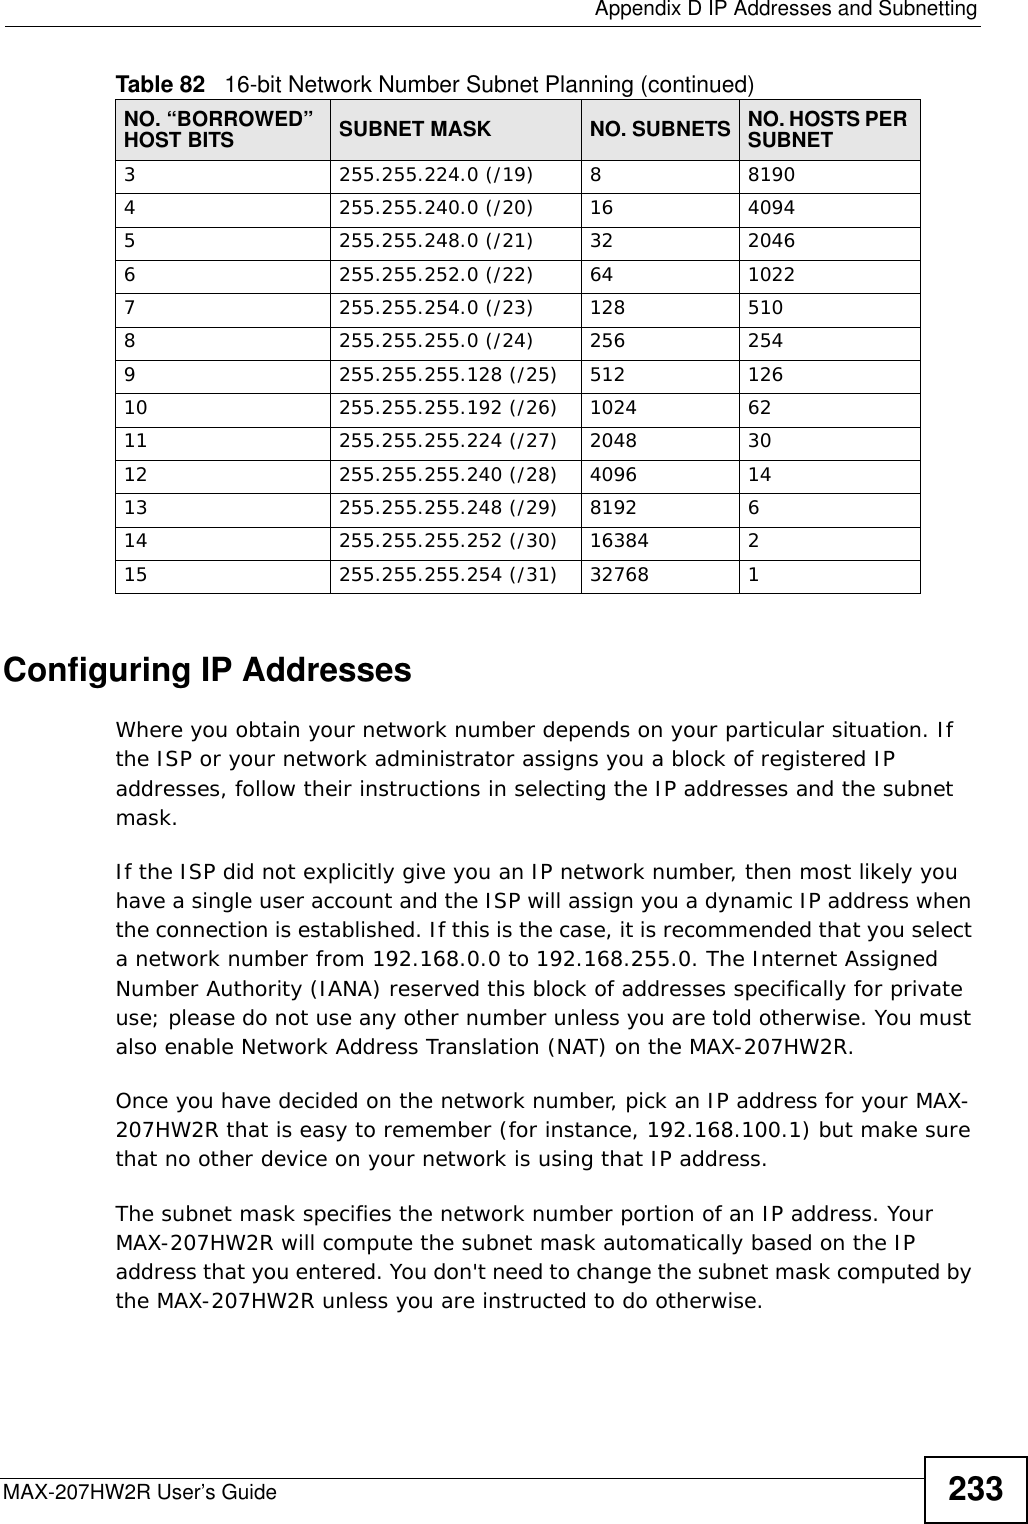  Appendix D IP Addresses and SubnettingMAX-207HW2R User’s Guide 233Configuring IP AddressesWhere you obtain your network number depends on your particular situation. If the ISP or your network administrator assigns you a block of registered IP addresses, follow their instructions in selecting the IP addresses and the subnet mask.If the ISP did not explicitly give you an IP network number, then most likely you have a single user account and the ISP will assign you a dynamic IP address when the connection is established. If this is the case, it is recommended that you select a network number from 192.168.0.0 to 192.168.255.0. The Internet Assigned Number Authority (IANA) reserved this block of addresses specifically for private use; please do not use any other number unless you are told otherwise. You must also enable Network Address Translation (NAT) on the MAX-207HW2R. Once you have decided on the network number, pick an IP address for your MAX-207HW2R that is easy to remember (for instance, 192.168.100.1) but make sure that no other device on your network is using that IP address.The subnet mask specifies the network number portion of an IP address. Your MAX-207HW2R will compute the subnet mask automatically based on the IP address that you entered. You don&apos;t need to change the subnet mask computed by the MAX-207HW2R unless you are instructed to do otherwise.3255.255.224.0 (/19) 881904255.255.240.0 (/20) 16 40945255.255.248.0 (/21) 32 20466255.255.252.0 (/22) 64 10227255.255.254.0 (/23) 128 5108255.255.255.0 (/24) 256 2549255.255.255.128 (/25) 512 12610 255.255.255.192 (/26) 1024 6211 255.255.255.224 (/27) 2048 3012 255.255.255.240 (/28) 4096 1413 255.255.255.248 (/29) 8192 614 255.255.255.252 (/30) 16384 215 255.255.255.254 (/31) 32768 1Table 82   16-bit Network Number Subnet Planning (continued)NO. “BORROWED” HOST BITS SUBNET MASK NO. SUBNETS NO. HOSTS PER SUBNET